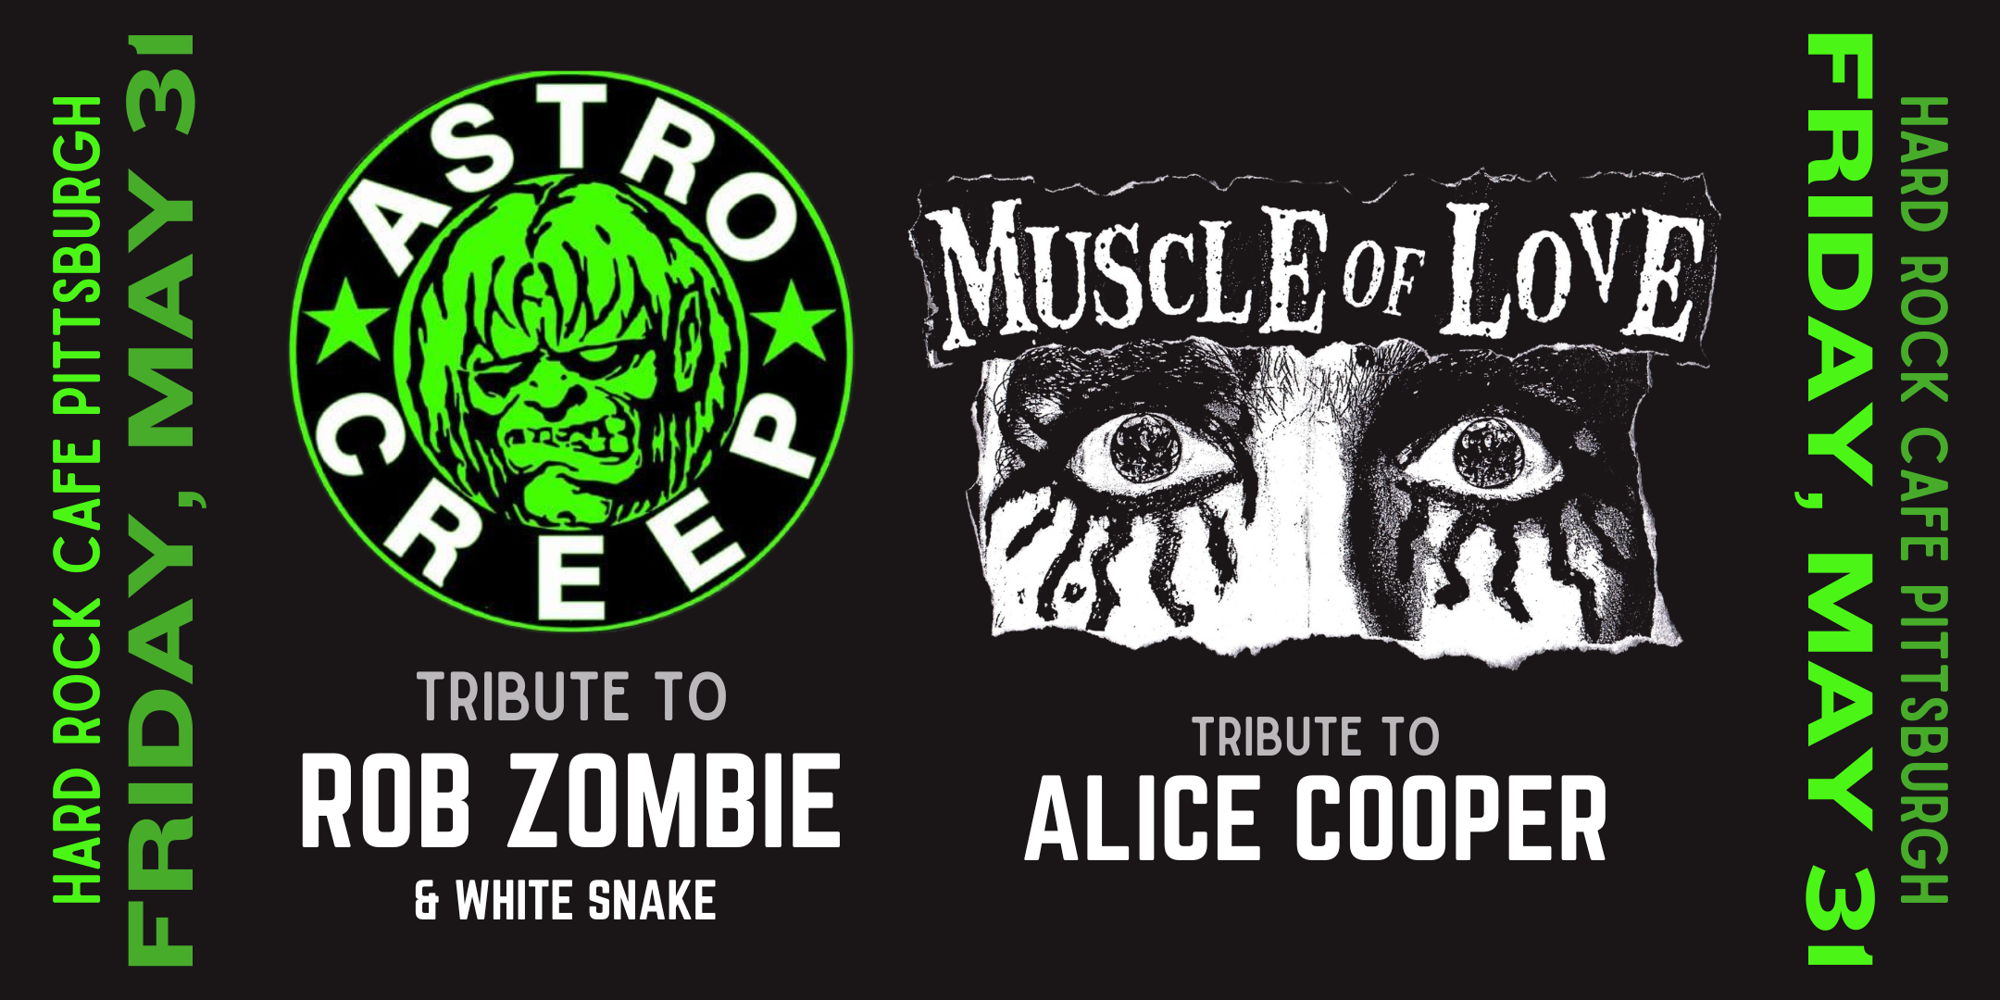 Astrocreep (Rob Zombie & White Snake) & Muscle of Creep (Alice Cooper) promotional image